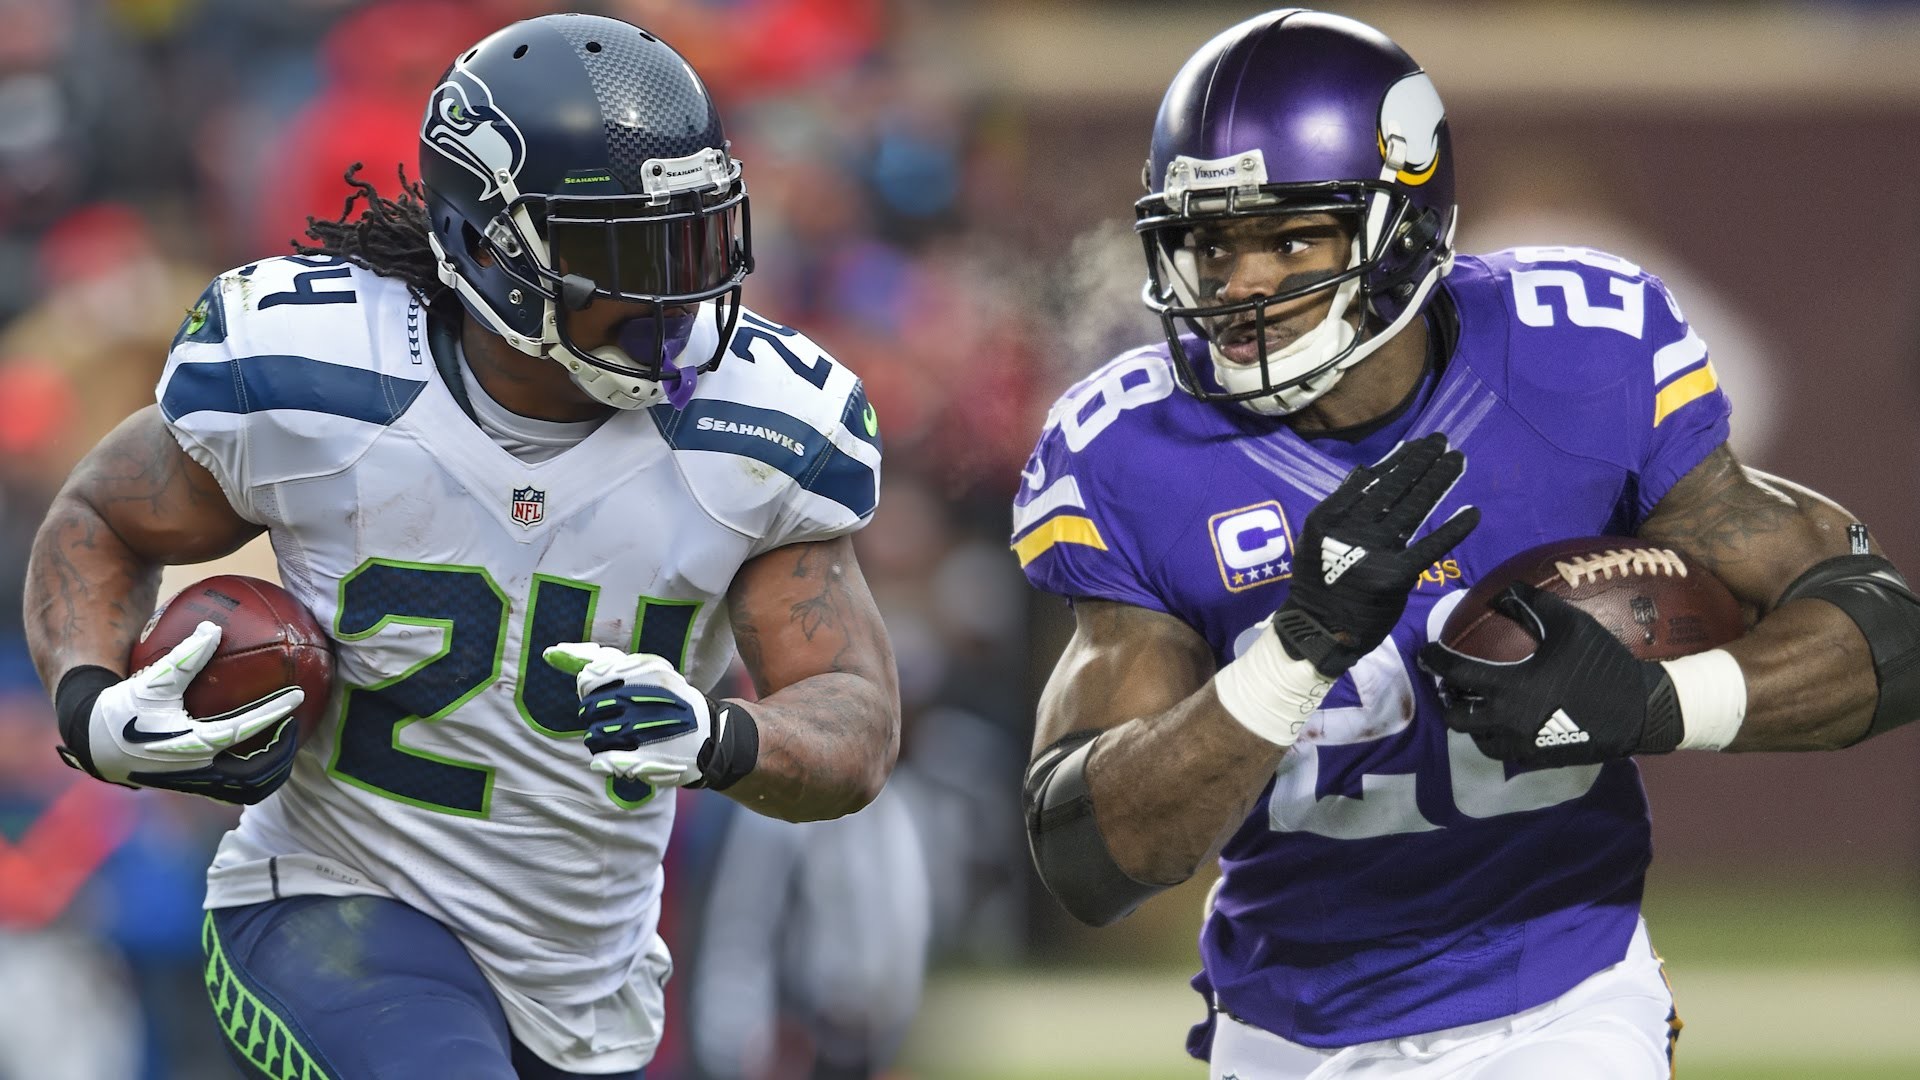 1920x1080 Adrian Peterson: Marshawn Lynch is the second best RB in the NFL